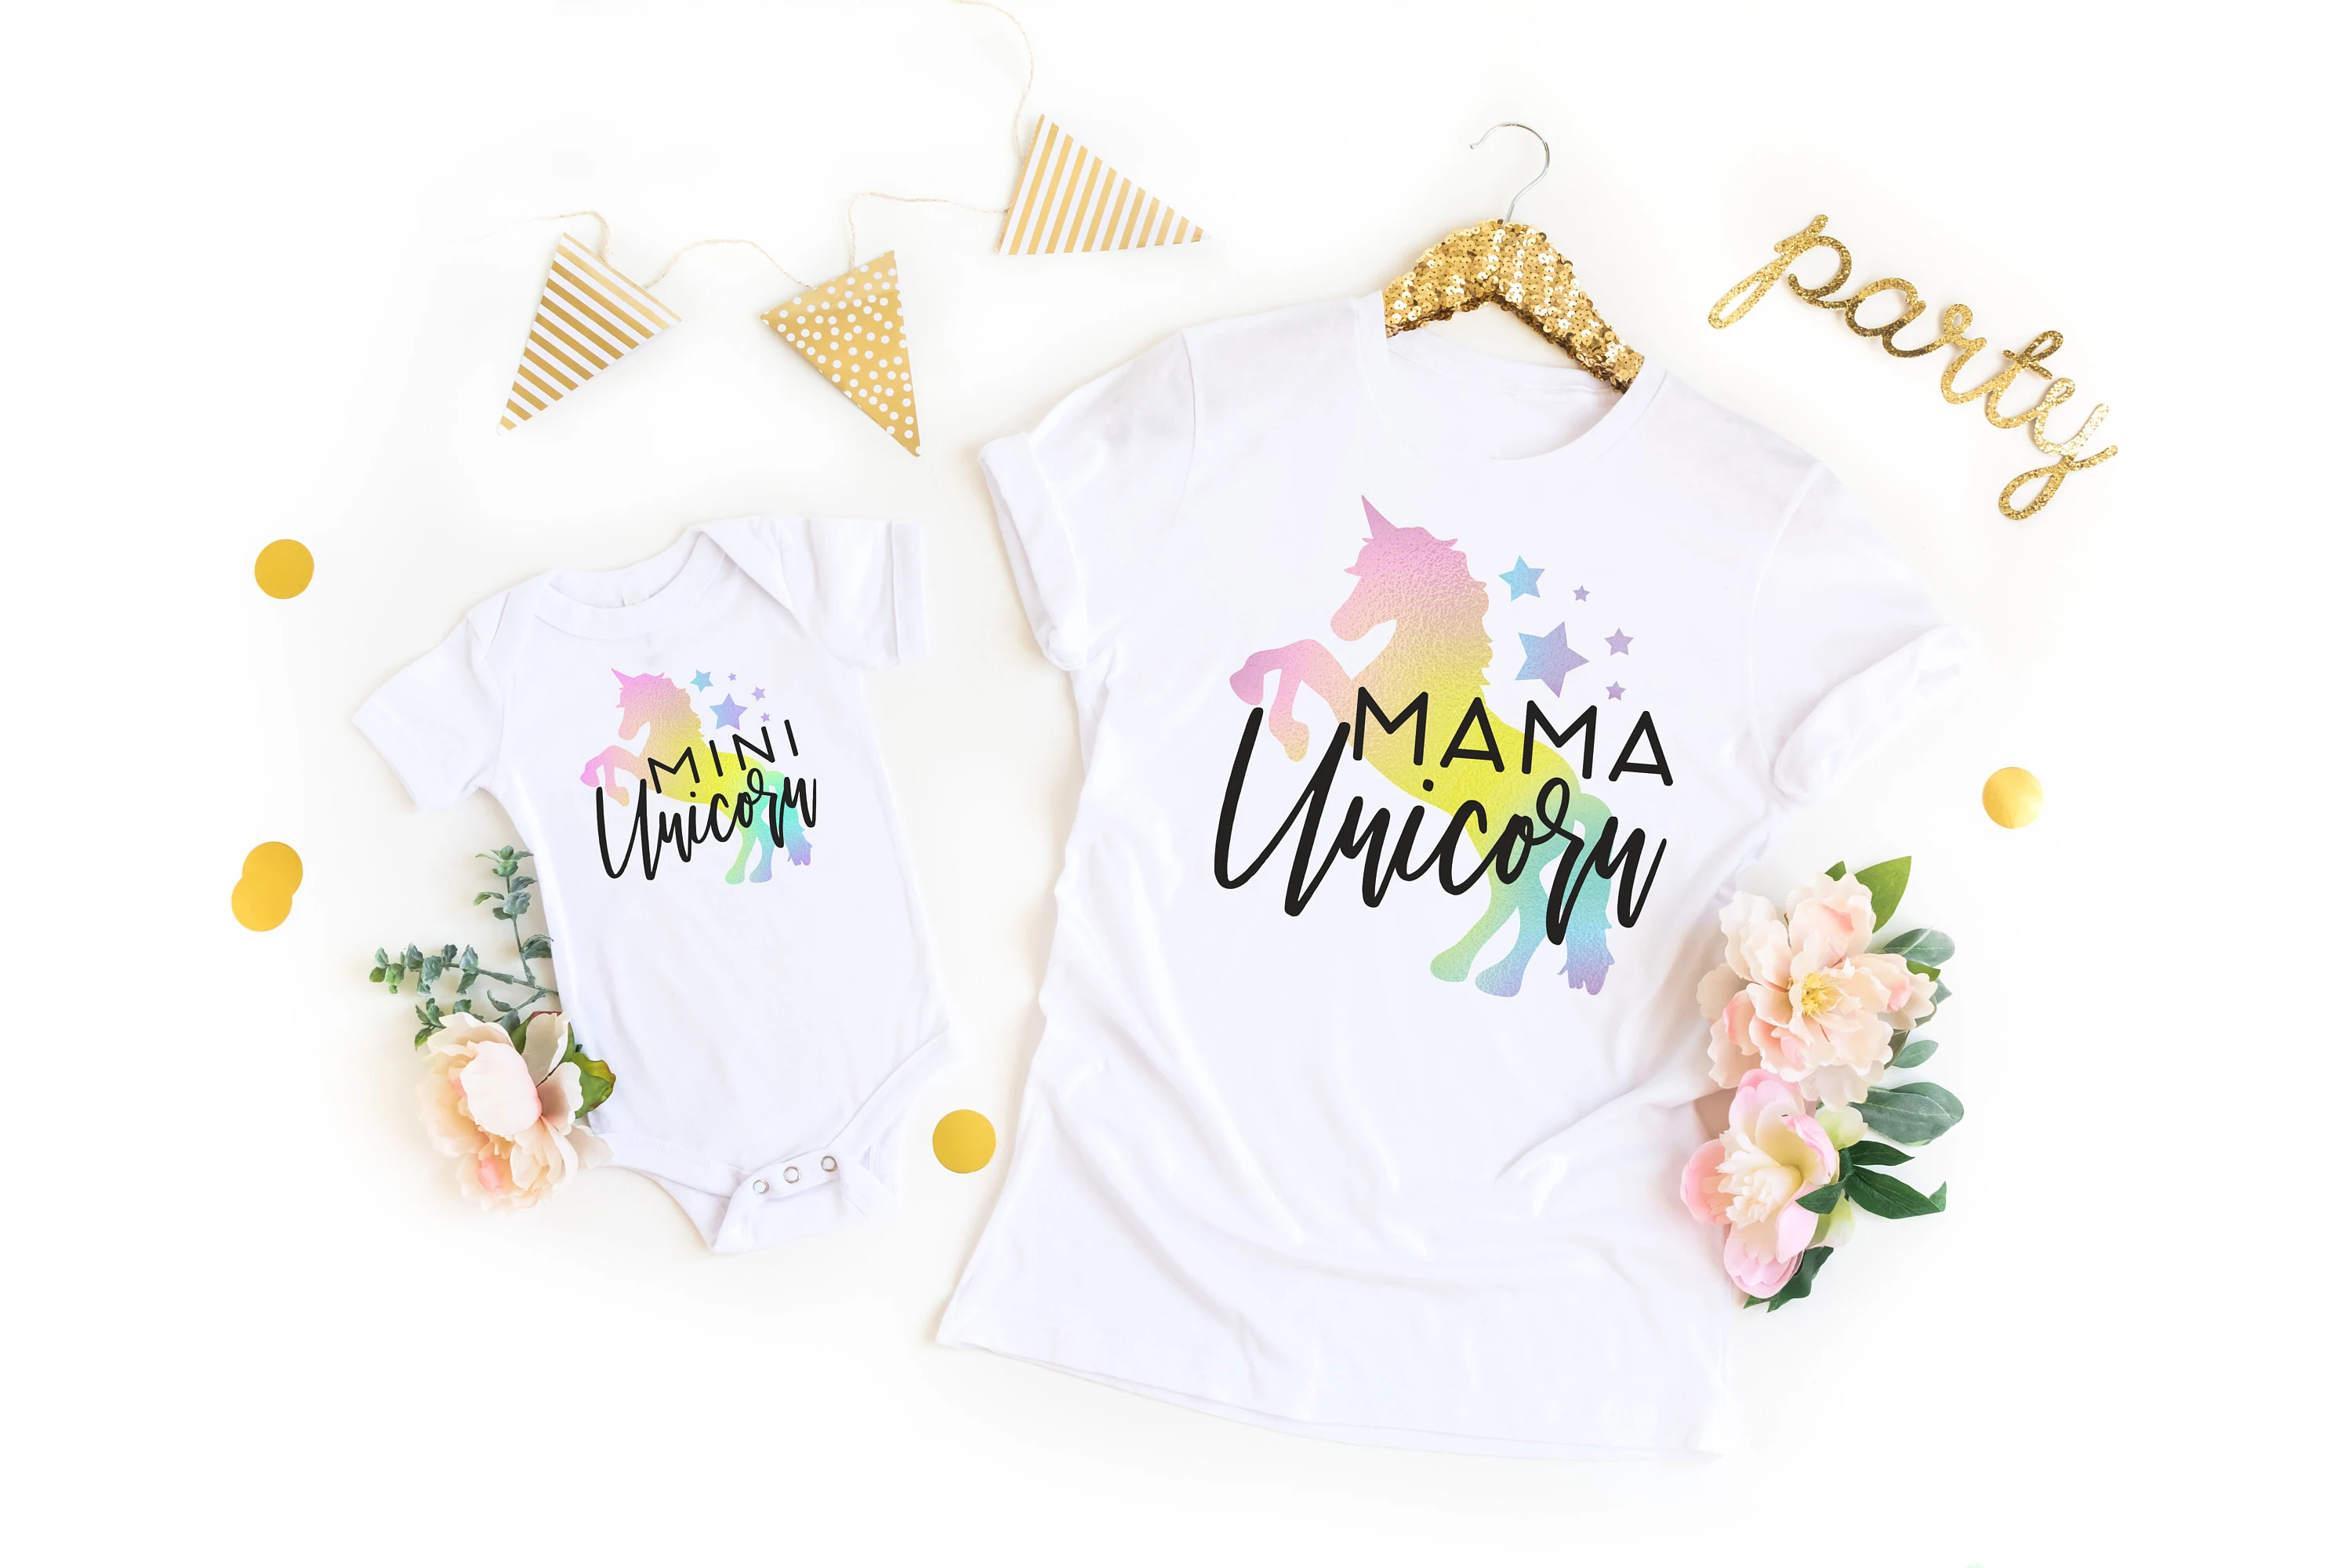 Unicorn Mom Shirt Mother And Daughter Shirts, Unicorn Shirt Unicorn Shirt Mom And Daughter Shirts